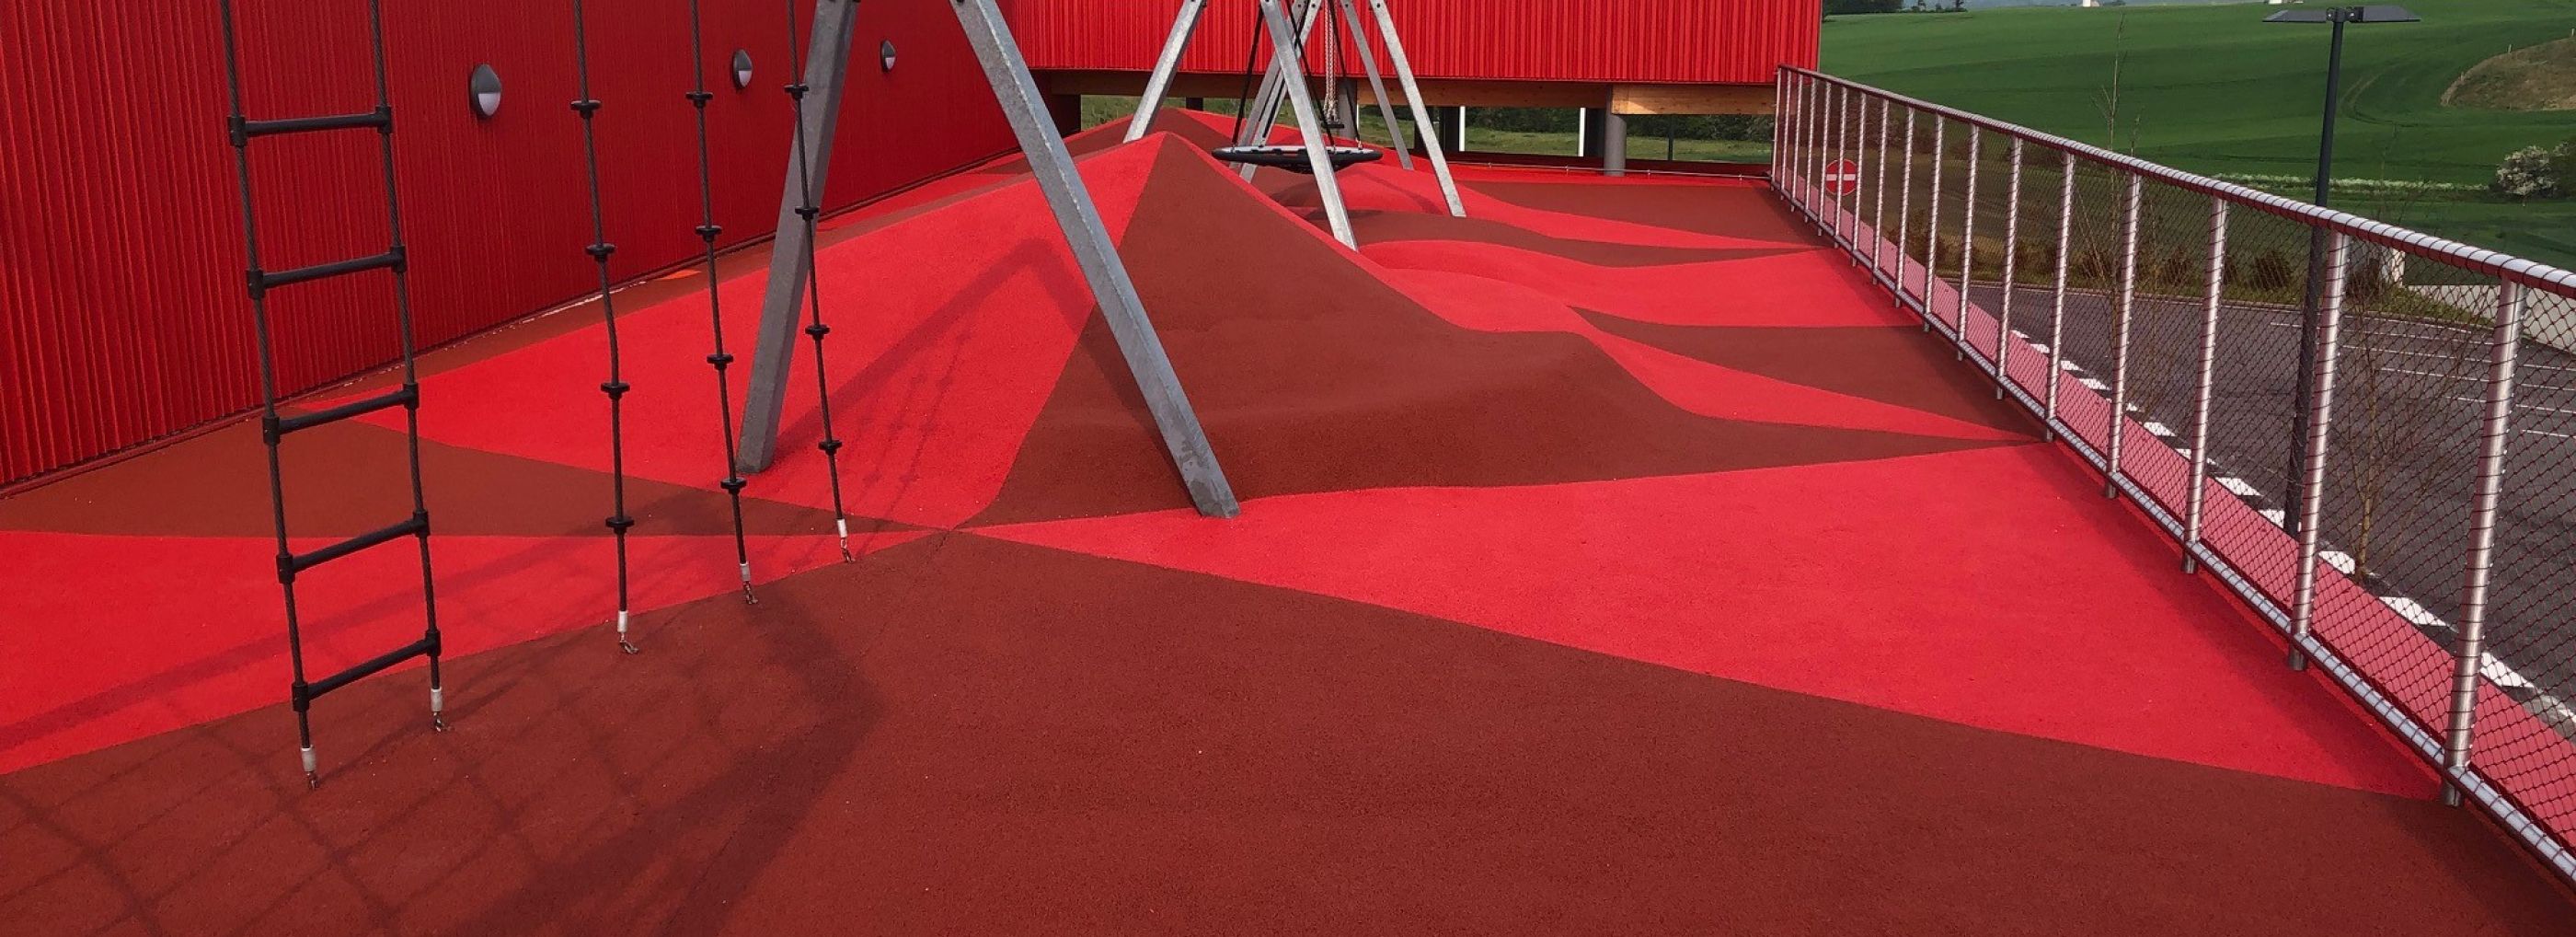 Outdoor playground with climbing frames with the entire floor made with red coloured rubber granules.